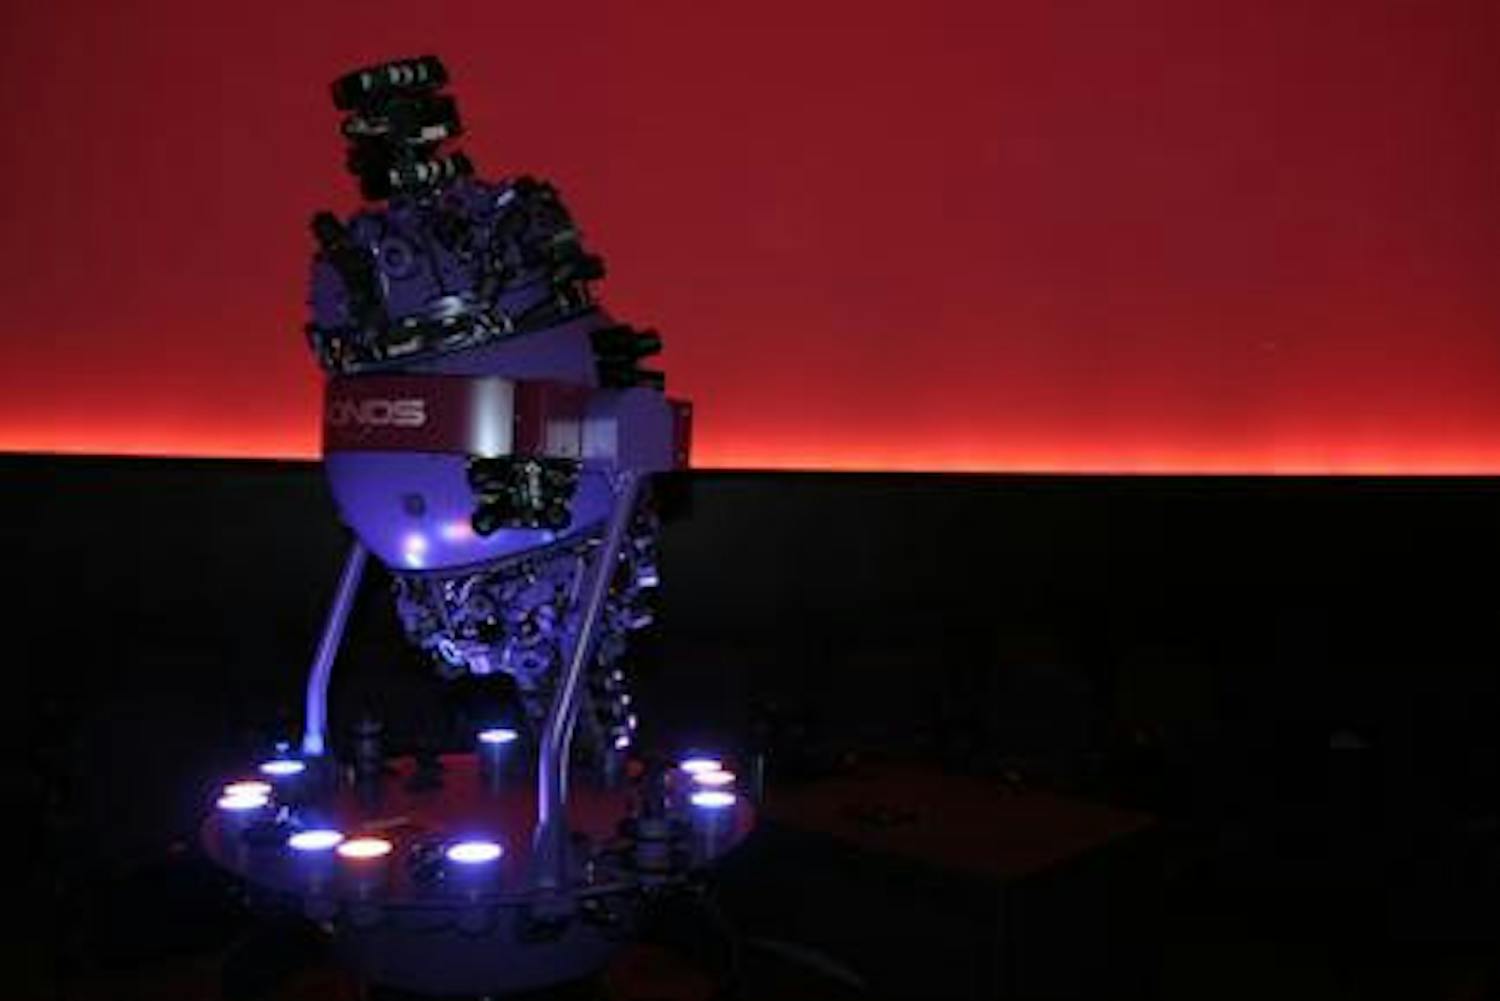 The Chronos planetarium projector, located inside the new Kika Silva Pla Planetarium completed in August 2006 on the SFCC campus, is set to dazzle people of all ages with its "Southern Nights" show when it officially opens to the public Friday at 8:30 p.m.